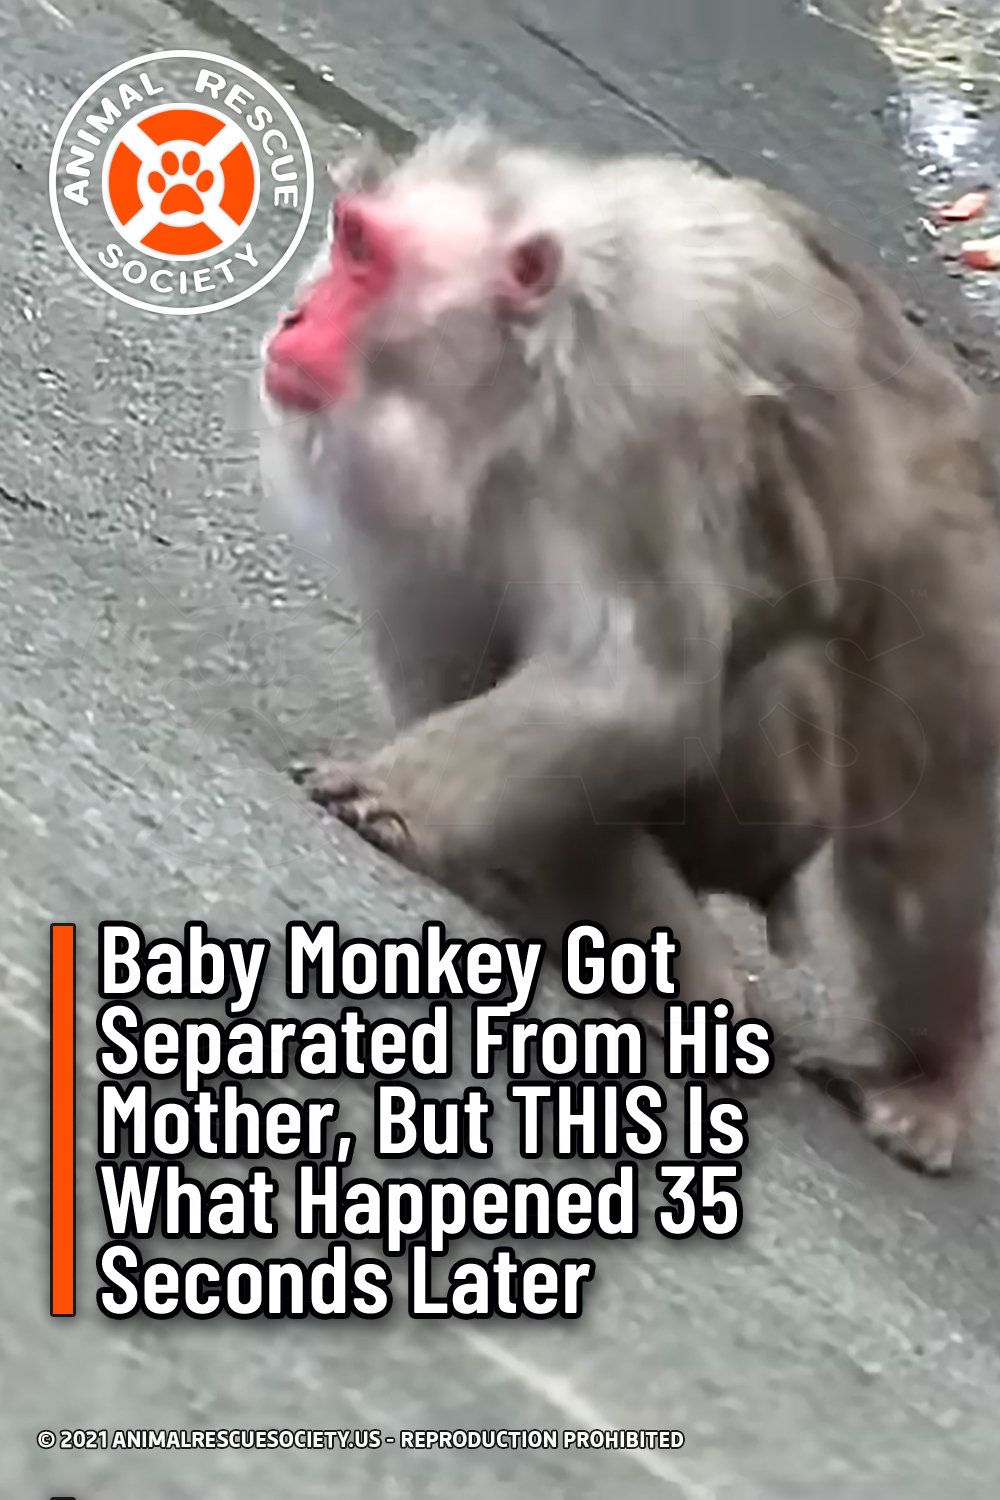 Baby Monkey Got Separated From His Mother, But THIS Is What Happened 35 Seconds Later